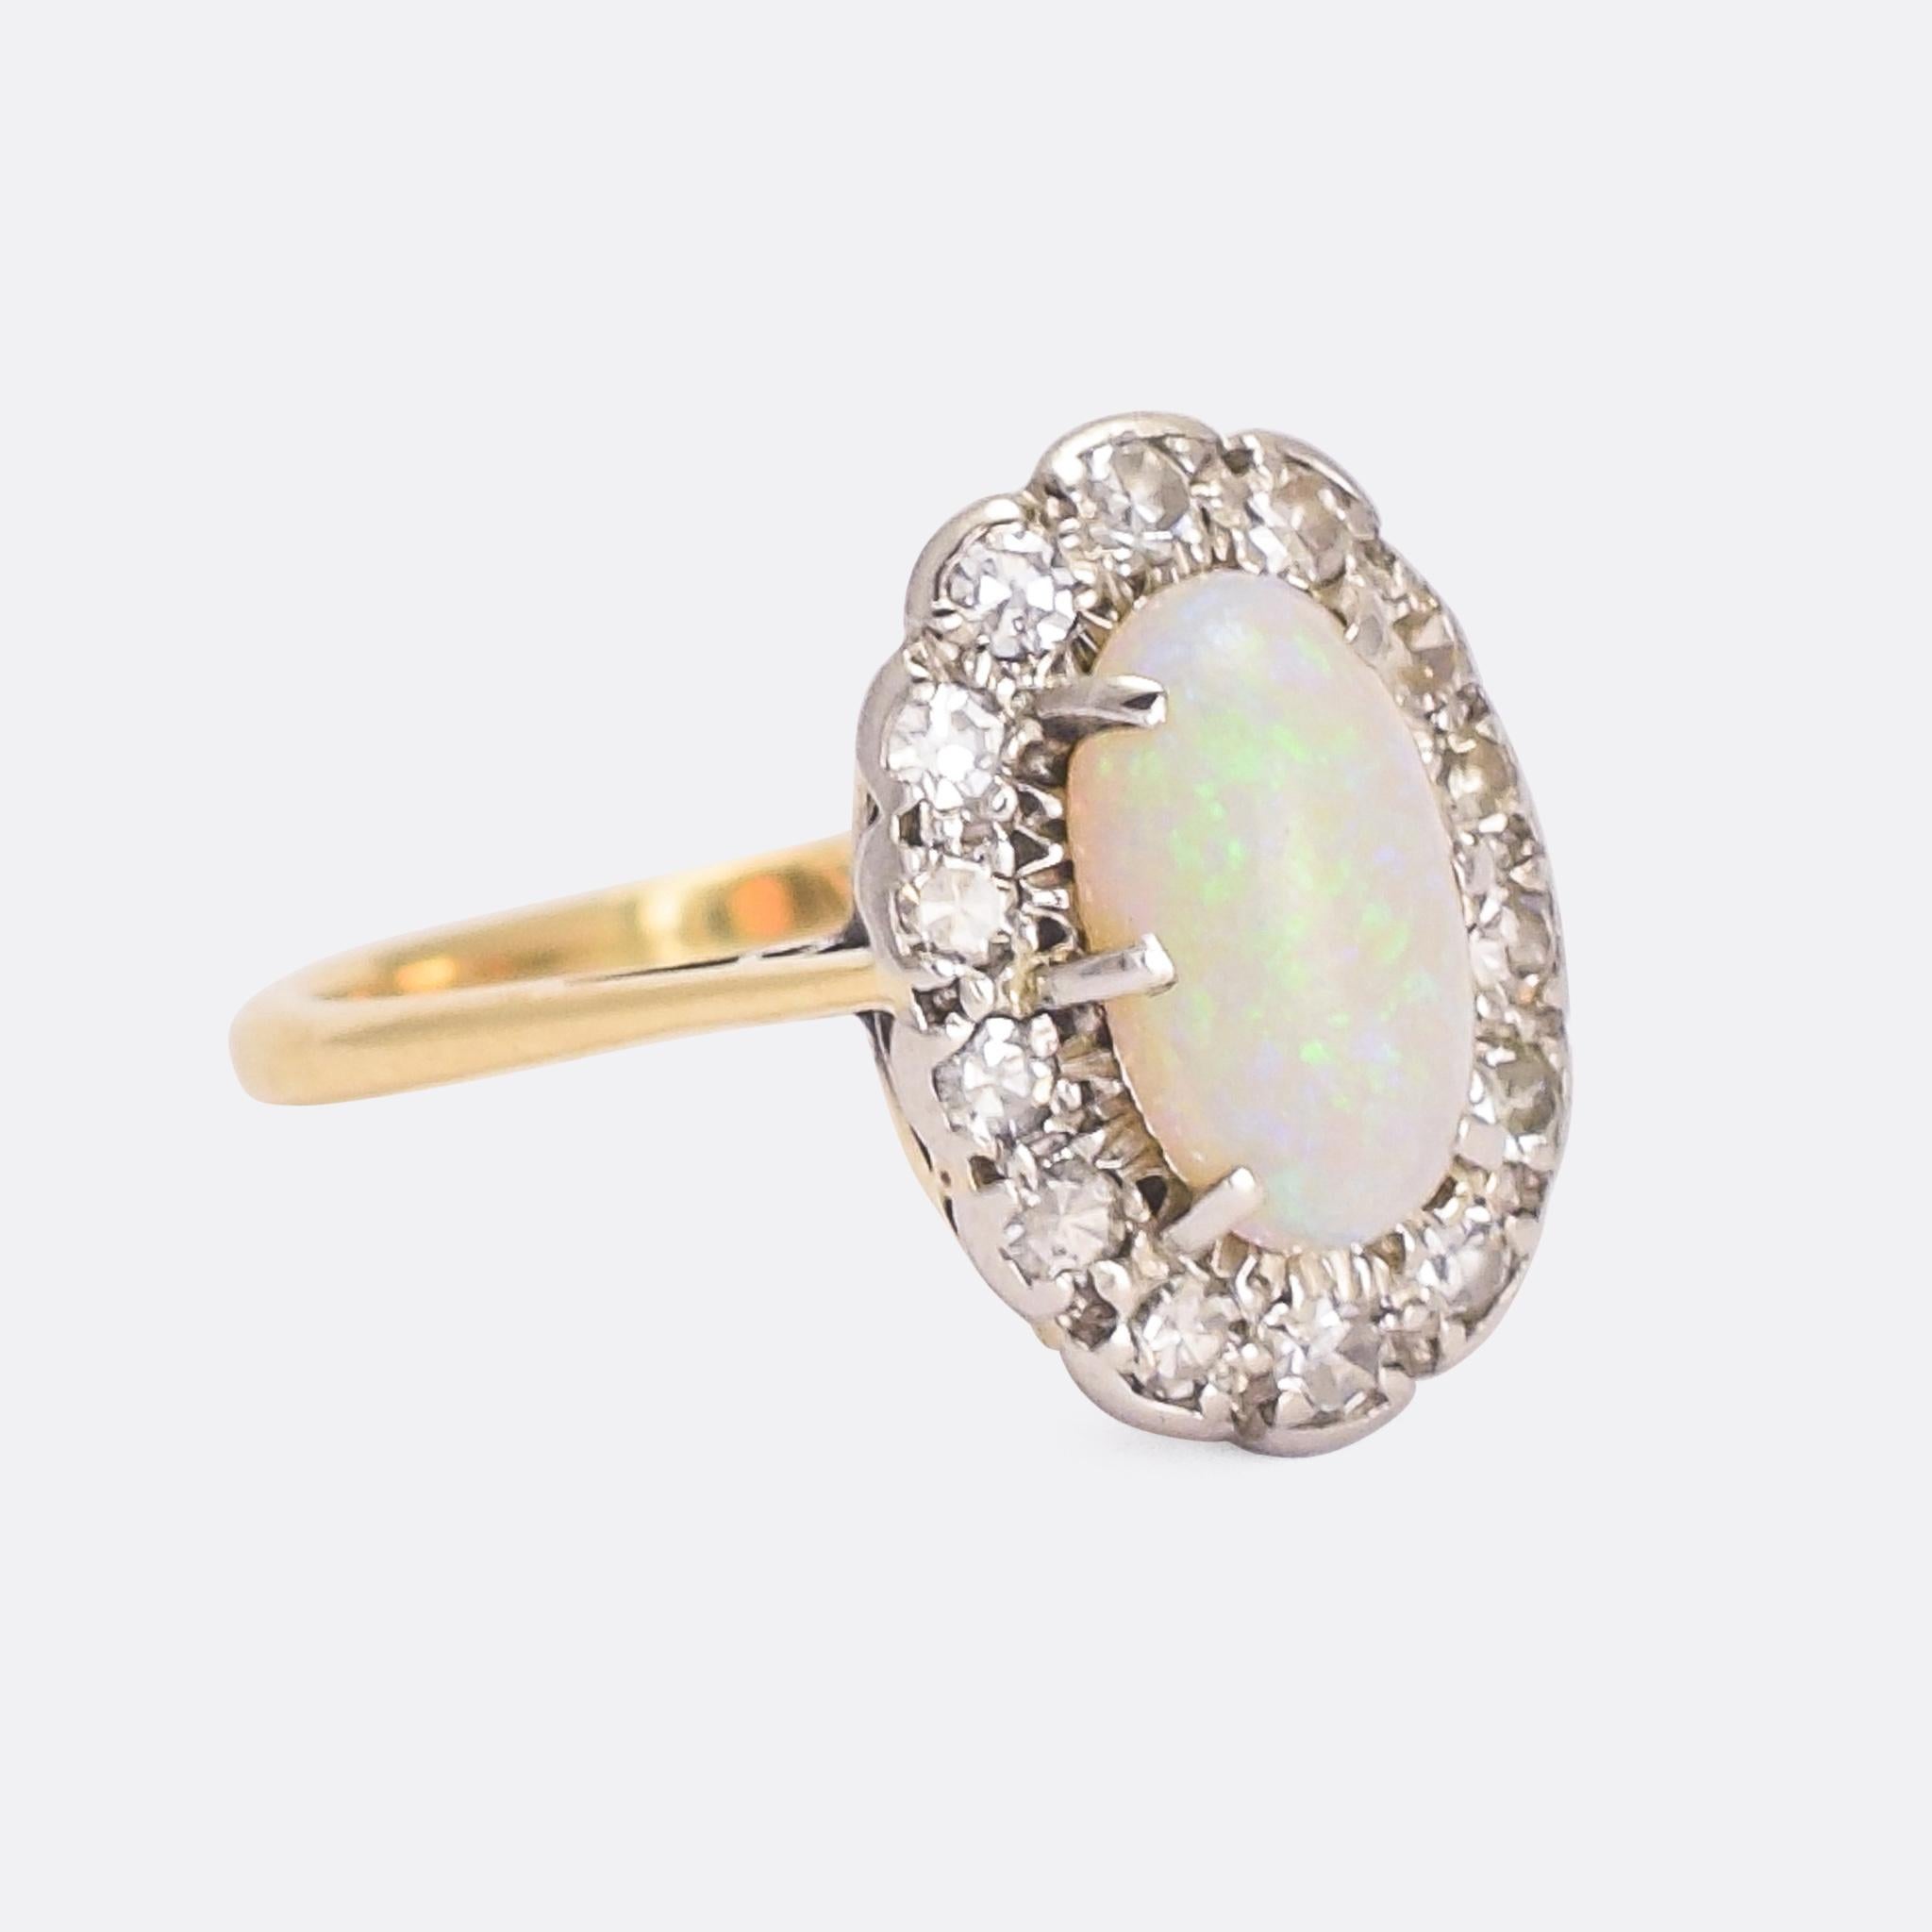 A beautiful antique opal and diamond oval cluster ring dating from the Edwardian era, circa 1910. It's modelled in 18 karat yellow gold with platinum settings, the latter chosen to enhance the colour of the stones. The opal is bright and lively,